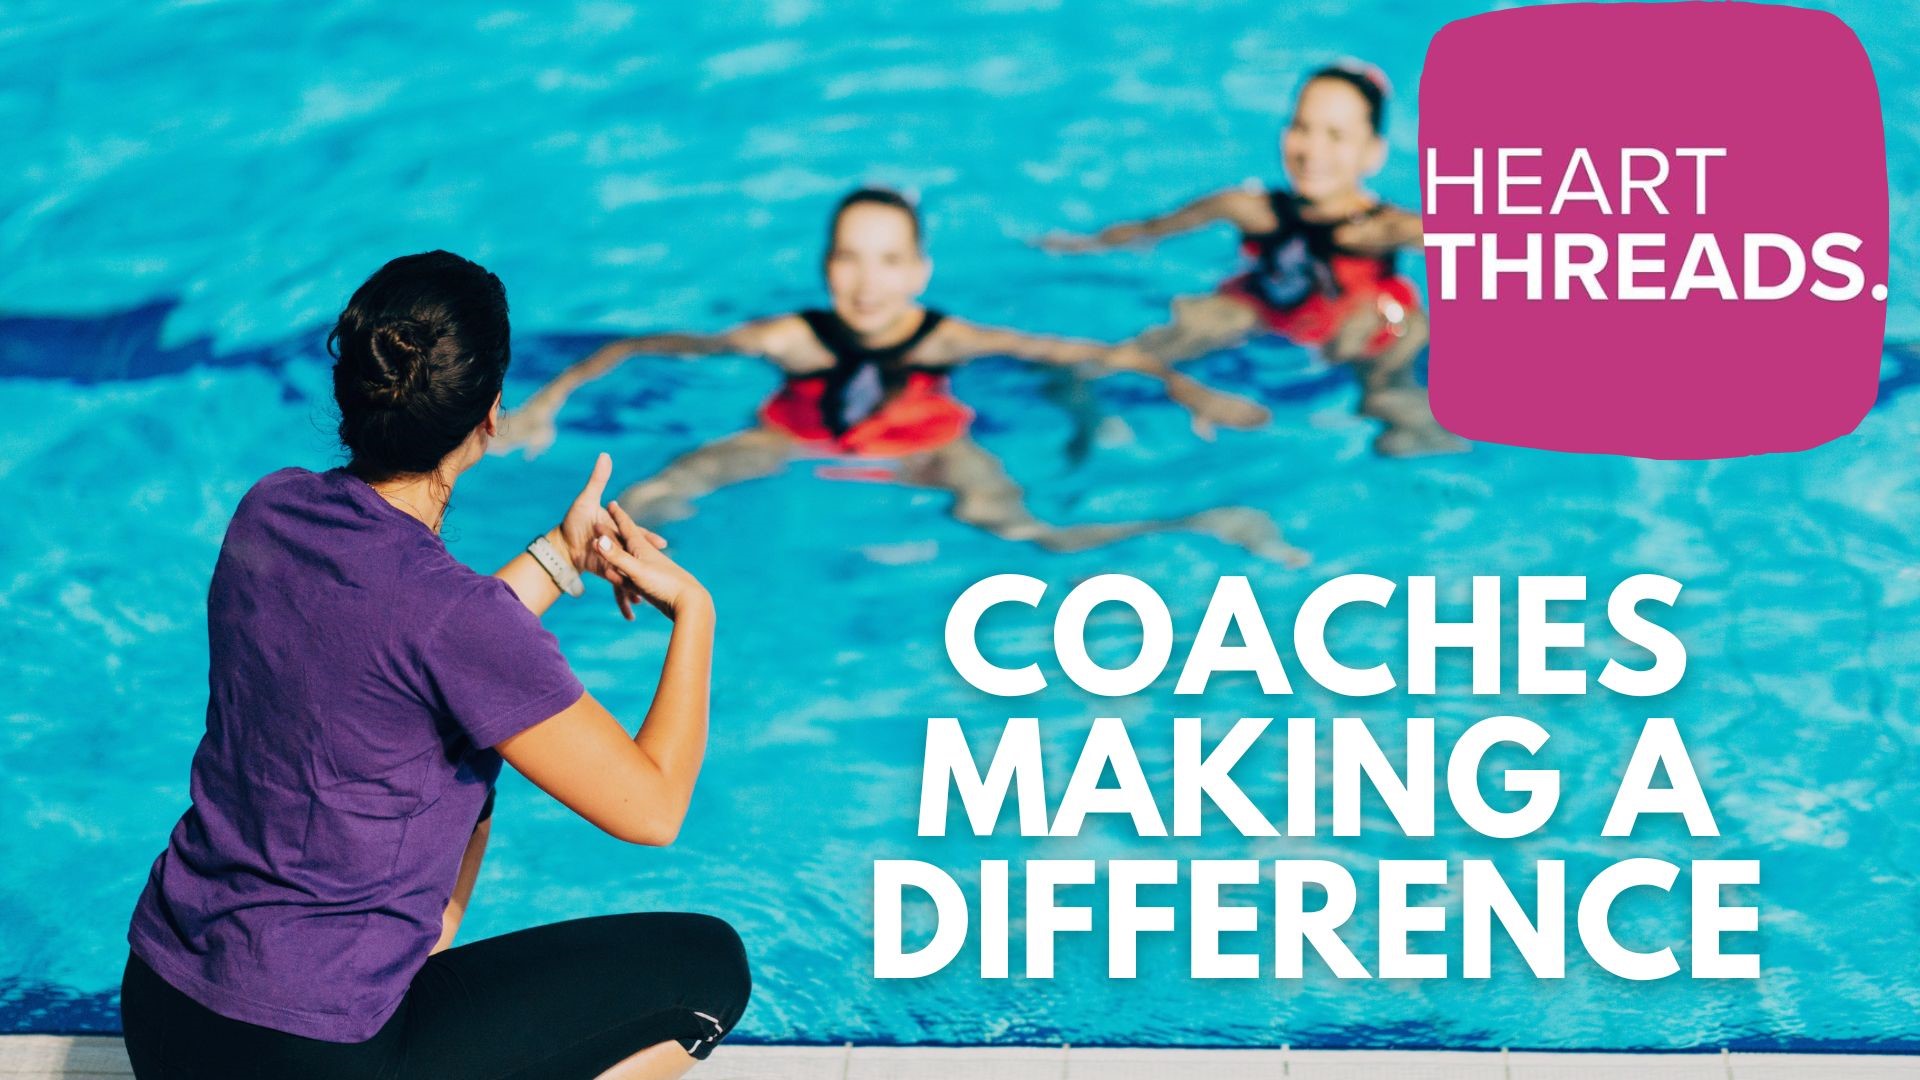 A collection of inspiring stories showcasing coaches of all levels helping out their teams and communities.